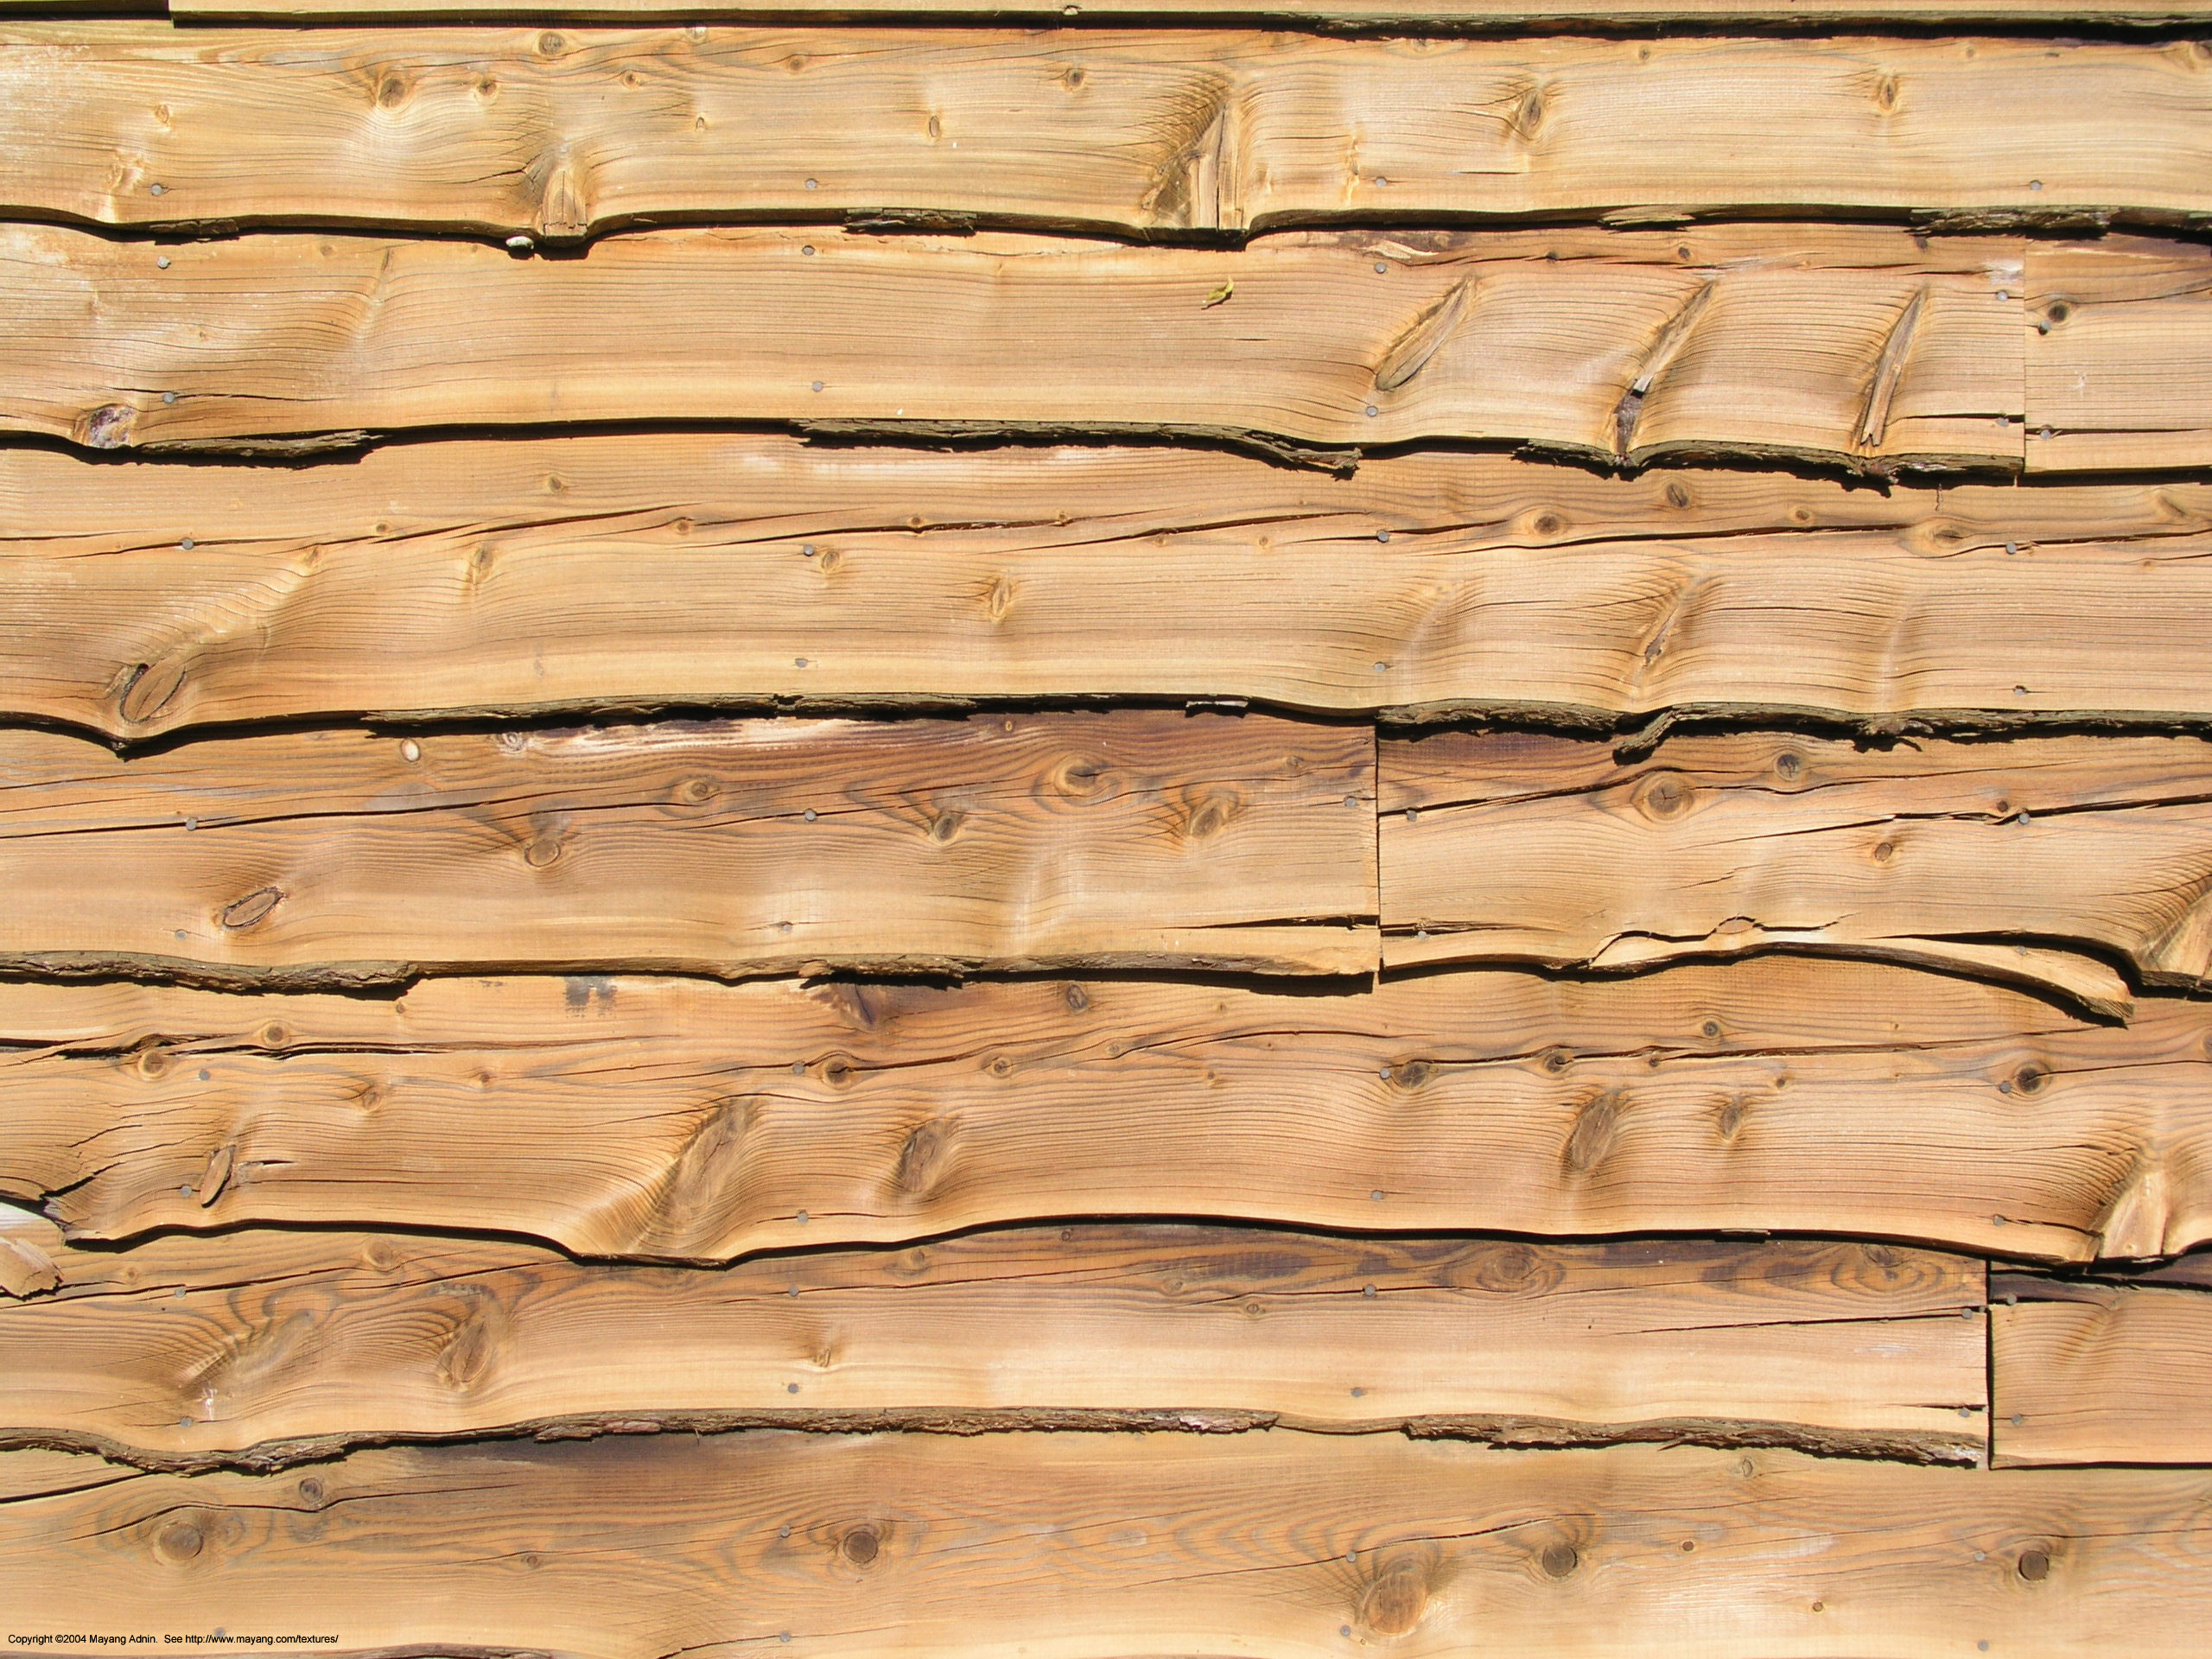 40 Stunning Wood Backgrounds